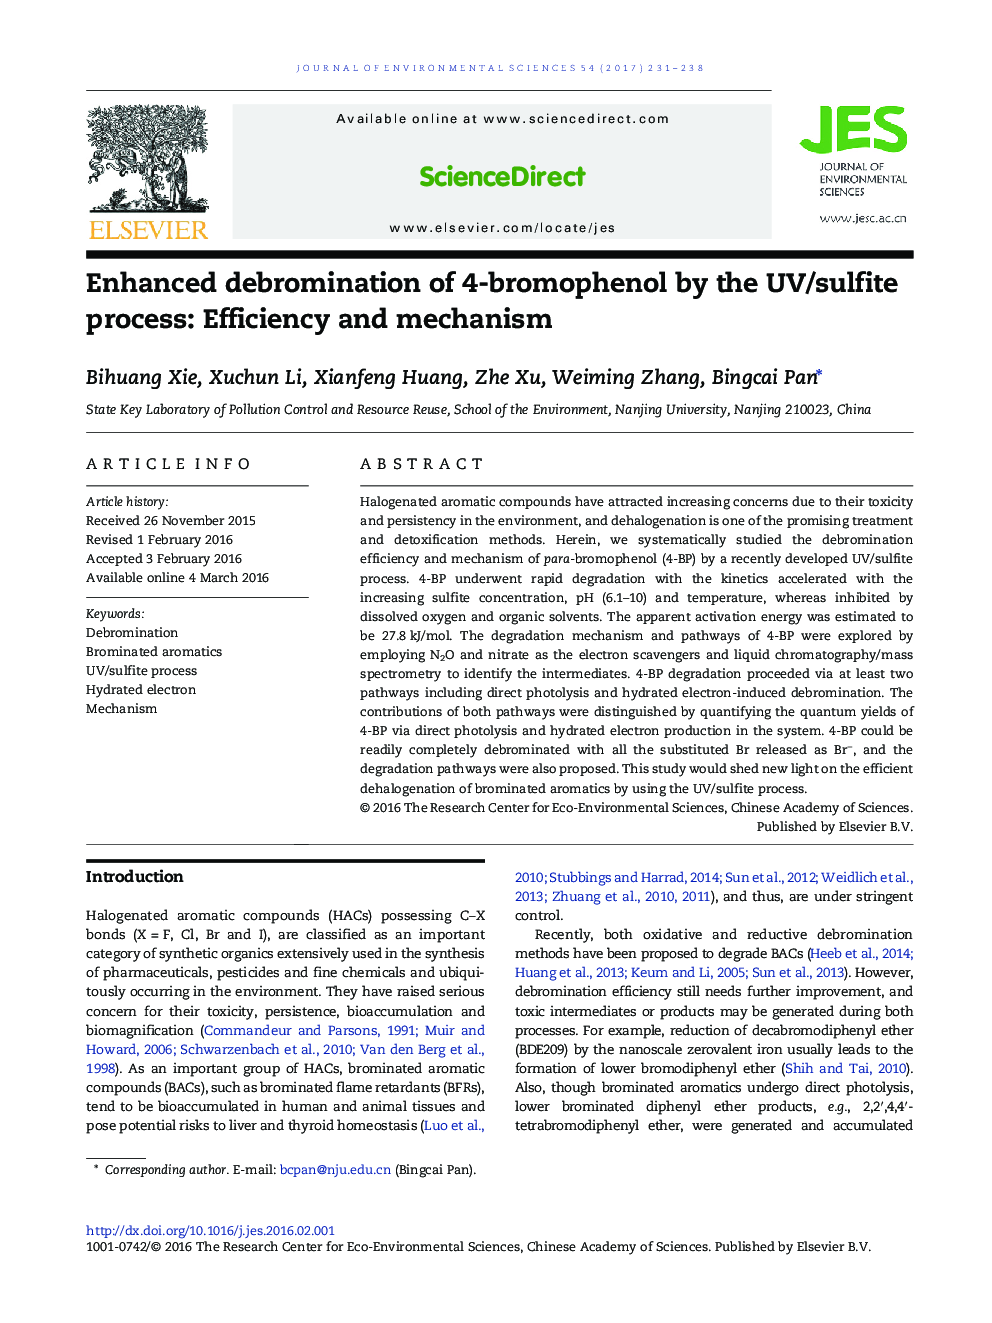 Enhanced debromination of 4-bromophenol by the UV/sulfite process: Efficiency and mechanism